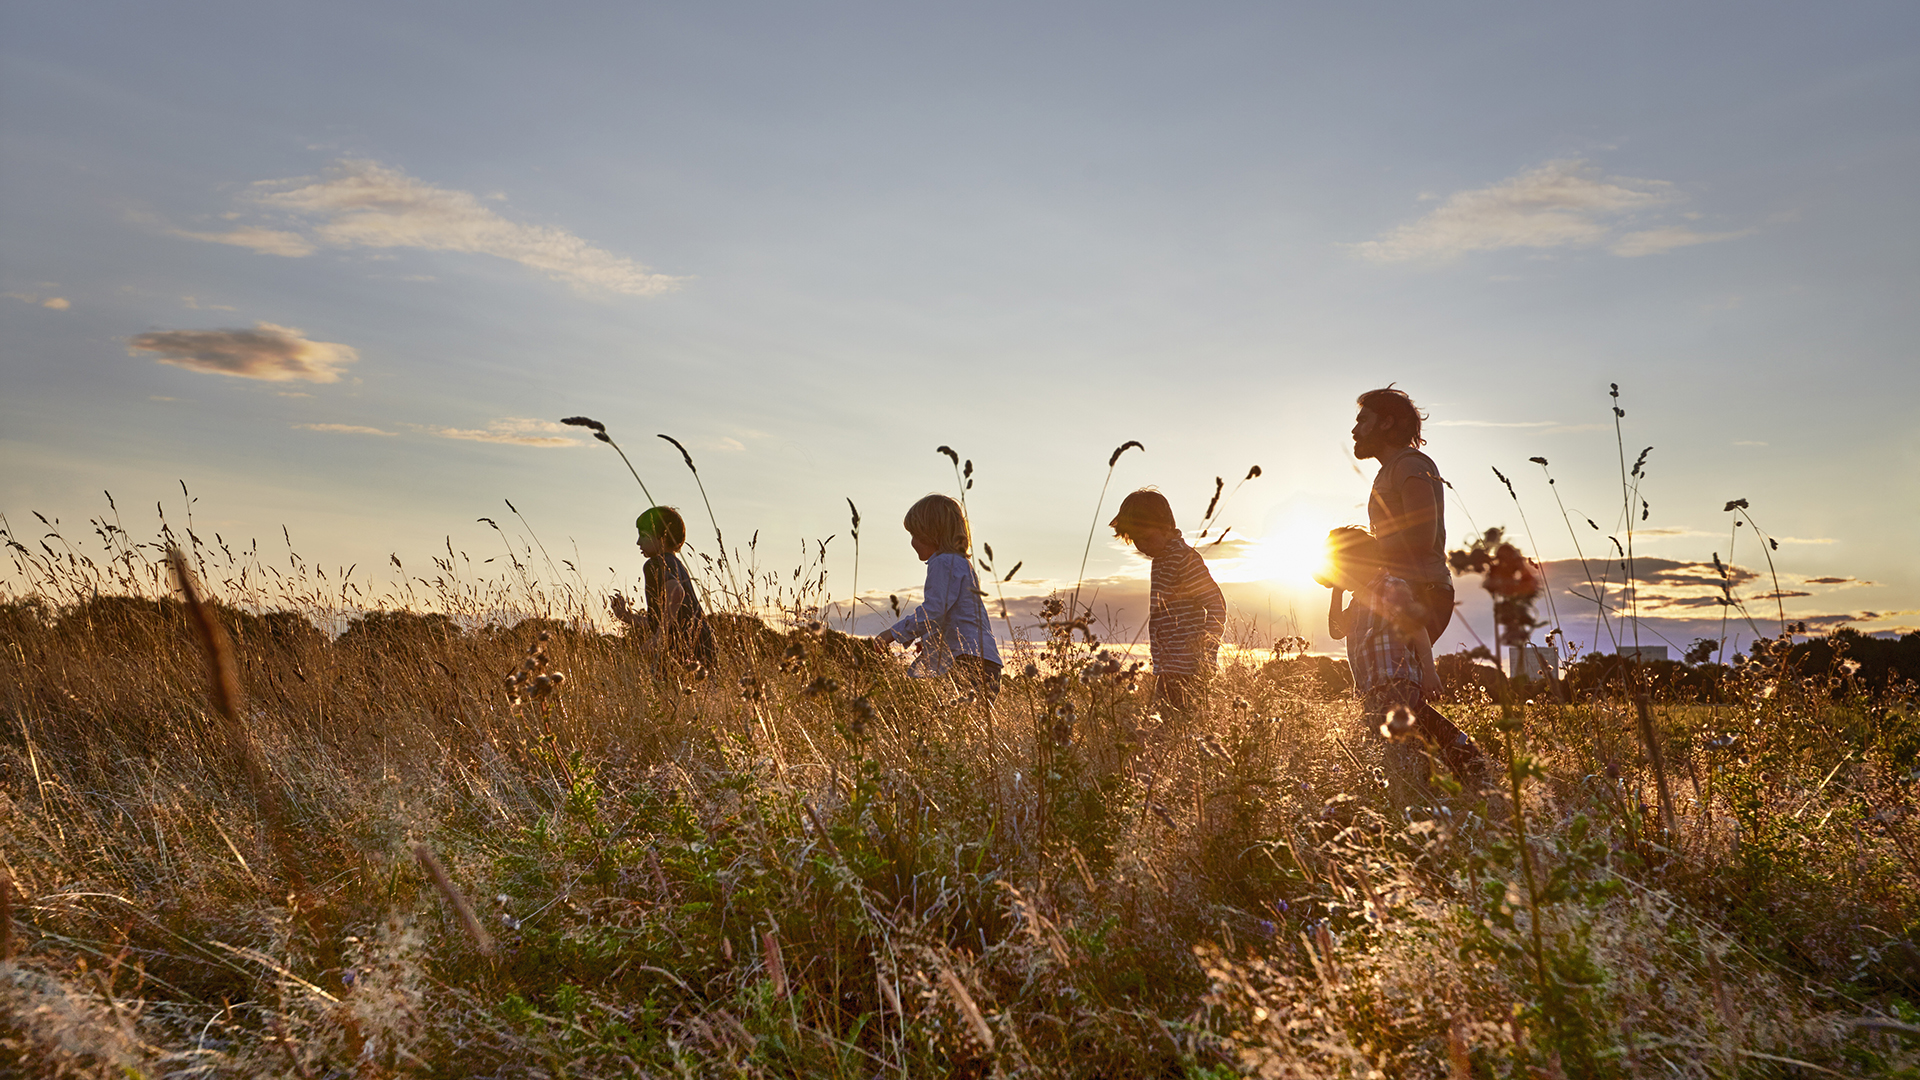 Family walking through field of long grass in sunset